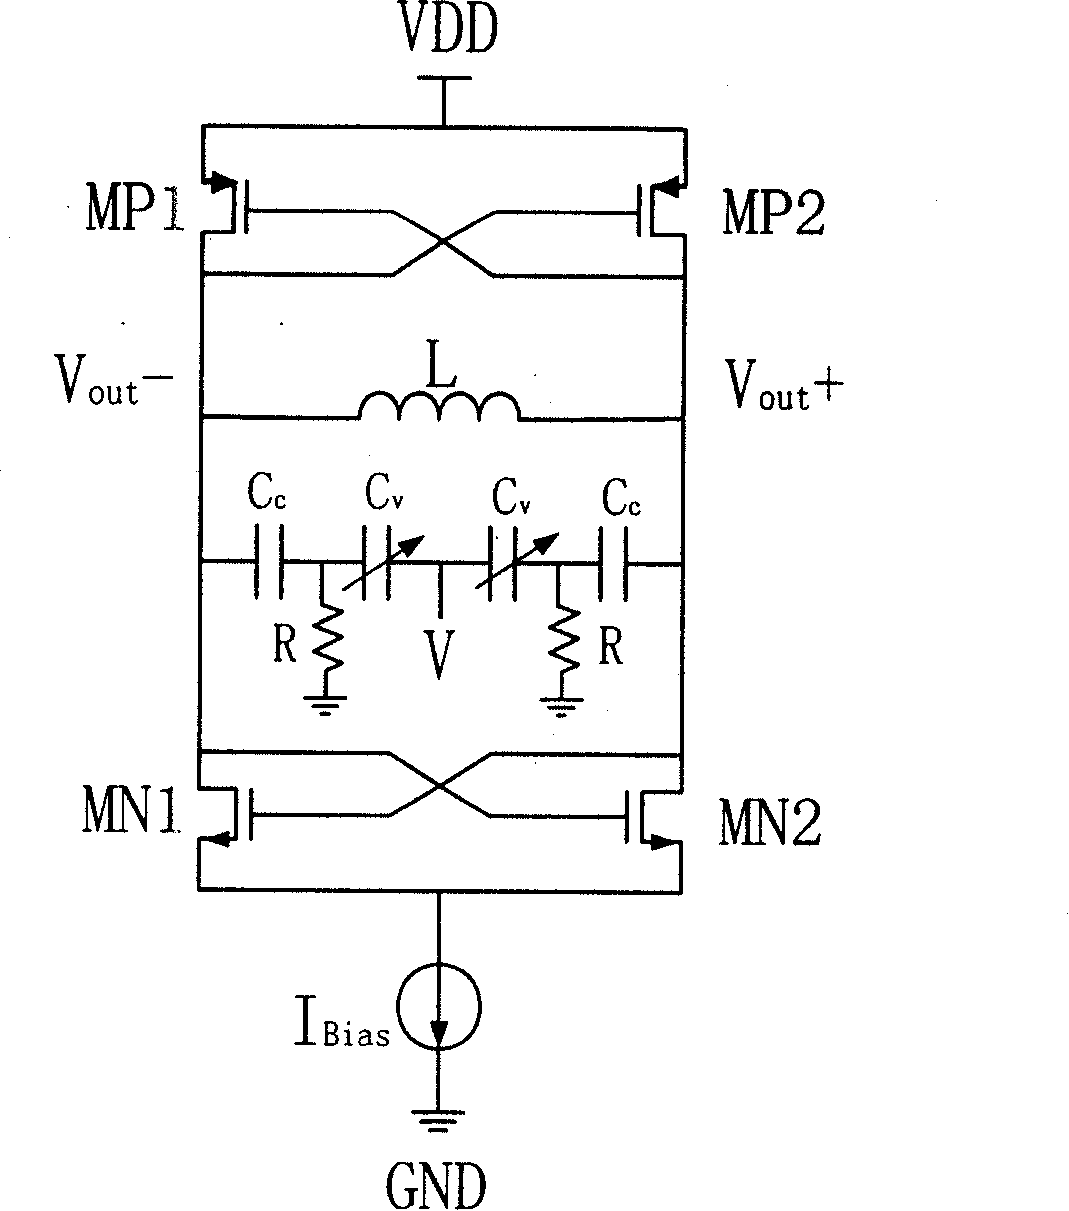 Voltage controlled oscillator for reducing gain surge